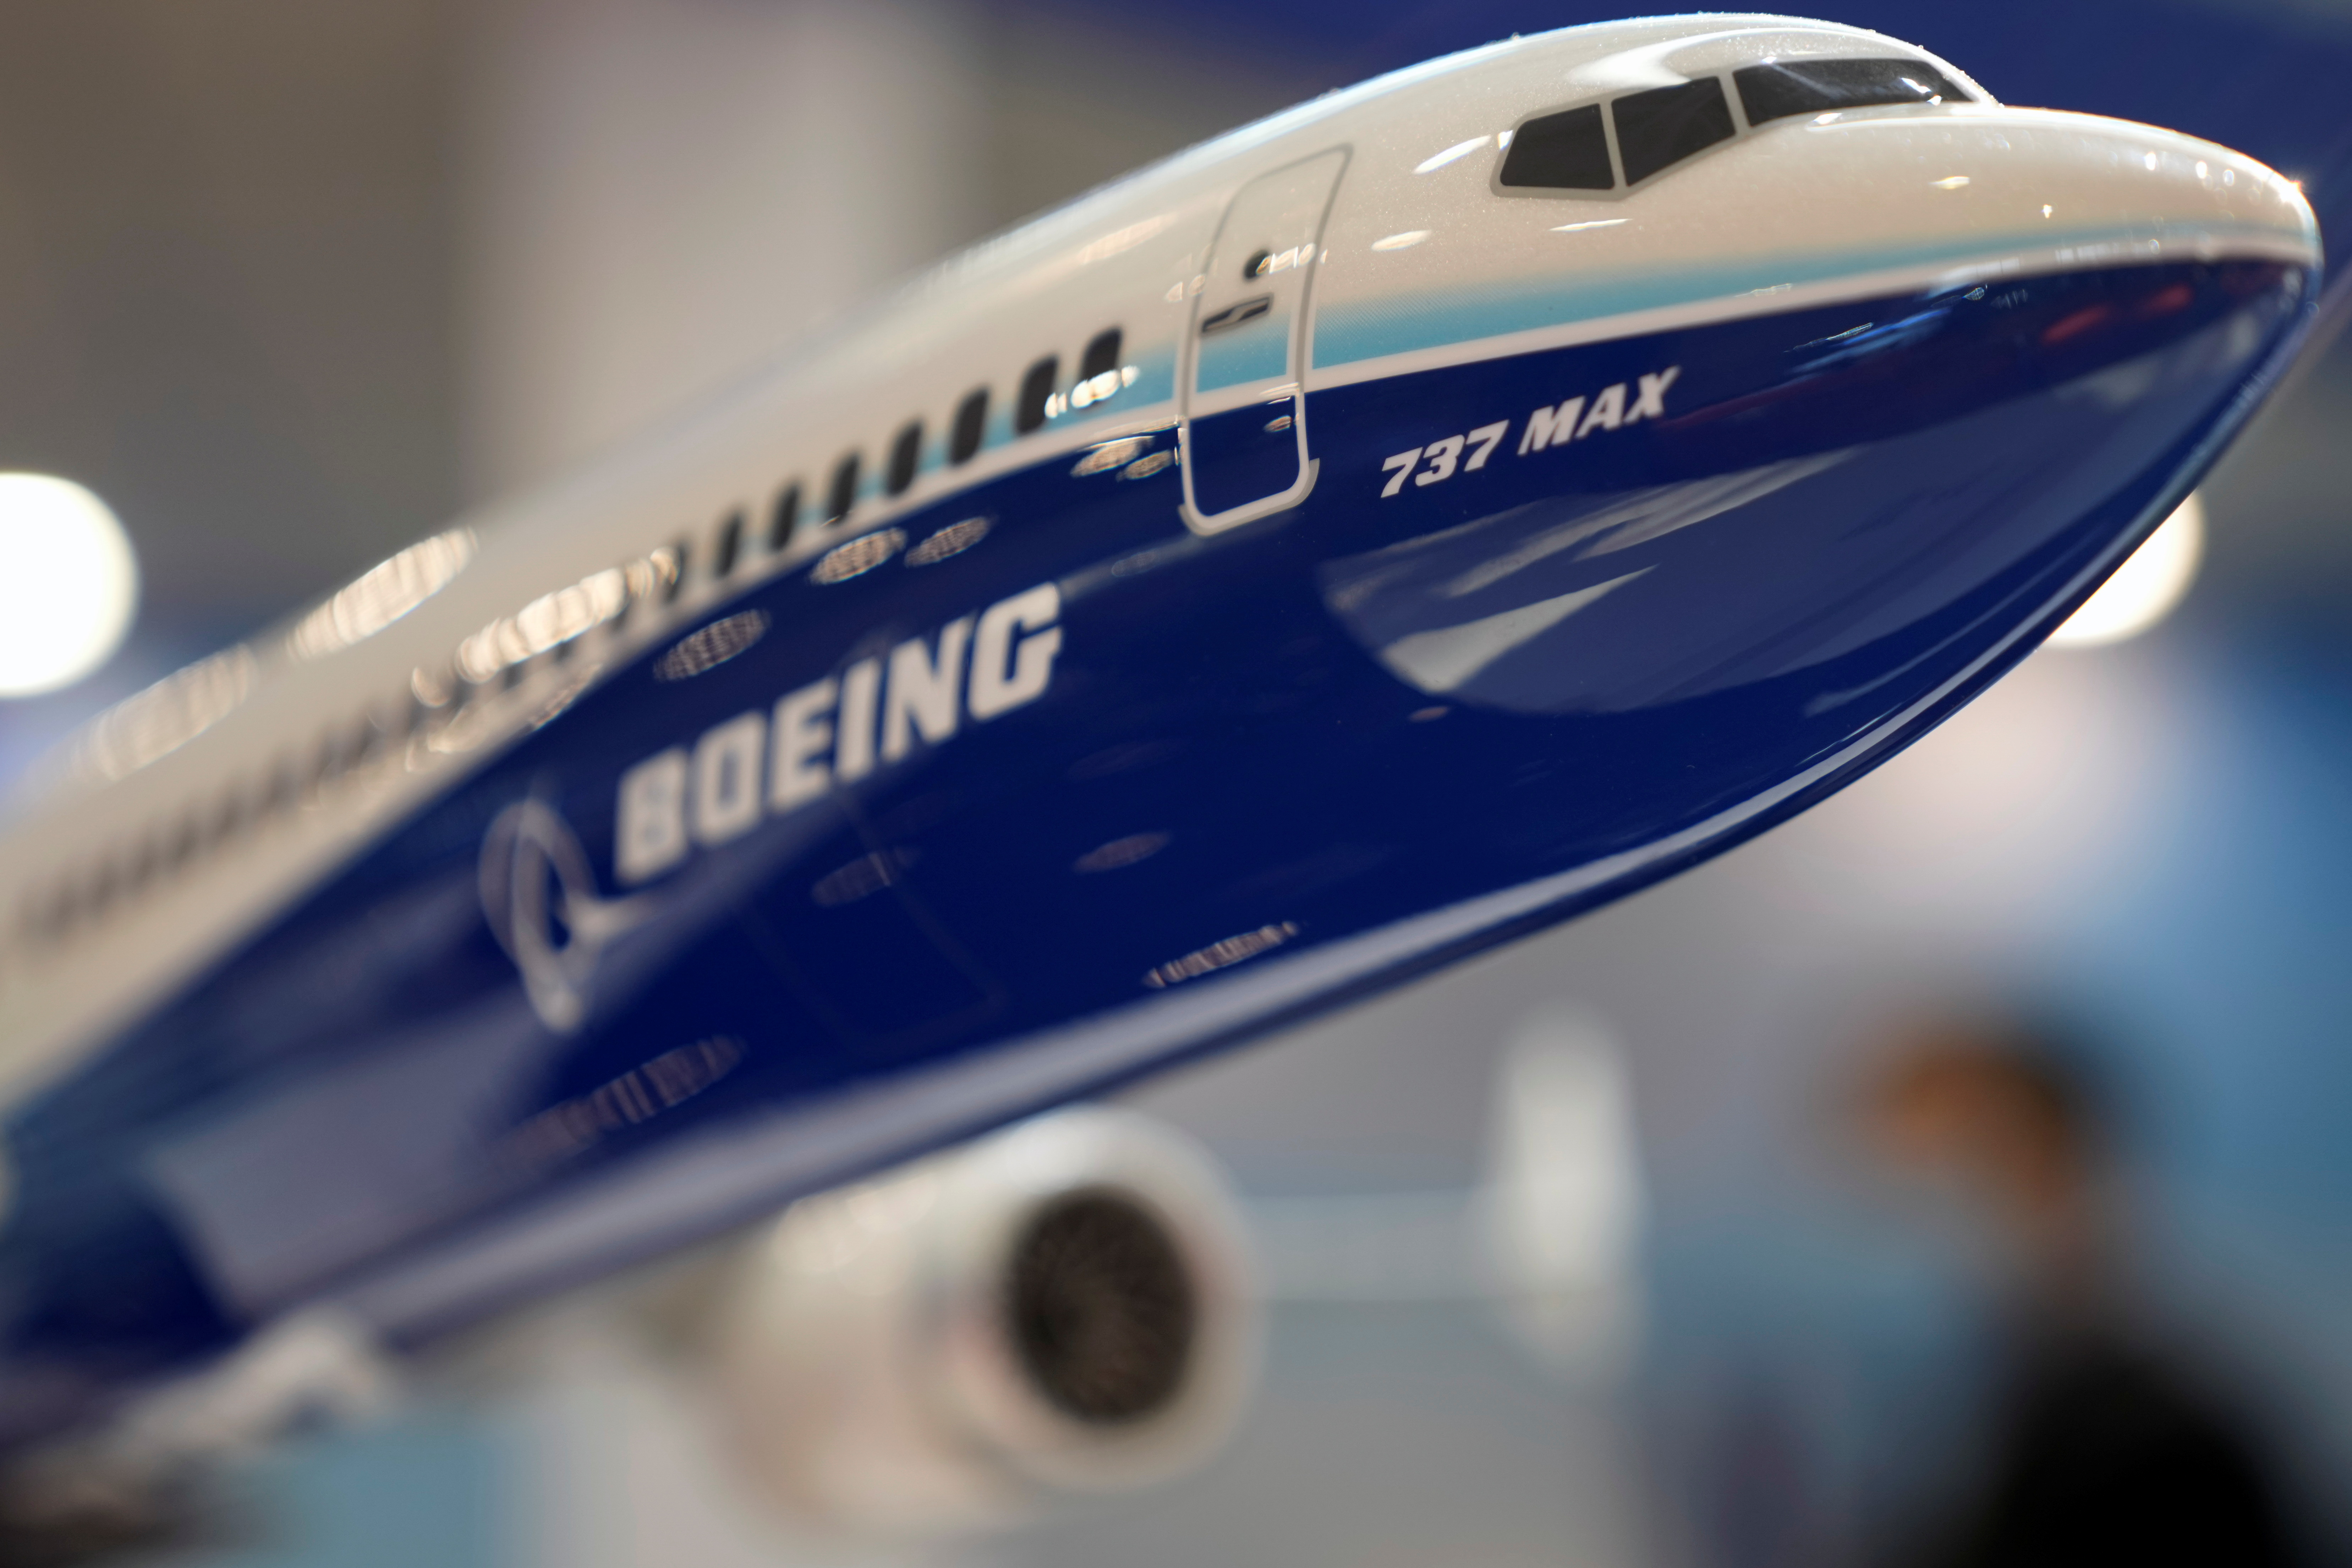 A model of Boeing 737 Max airliner is seen displayed at the China International Aviation and Aerospace Exhibition, or Airshow China, in Zhuhai, Guangdong province, China September 28, 2021. REUTERS/Aly Song